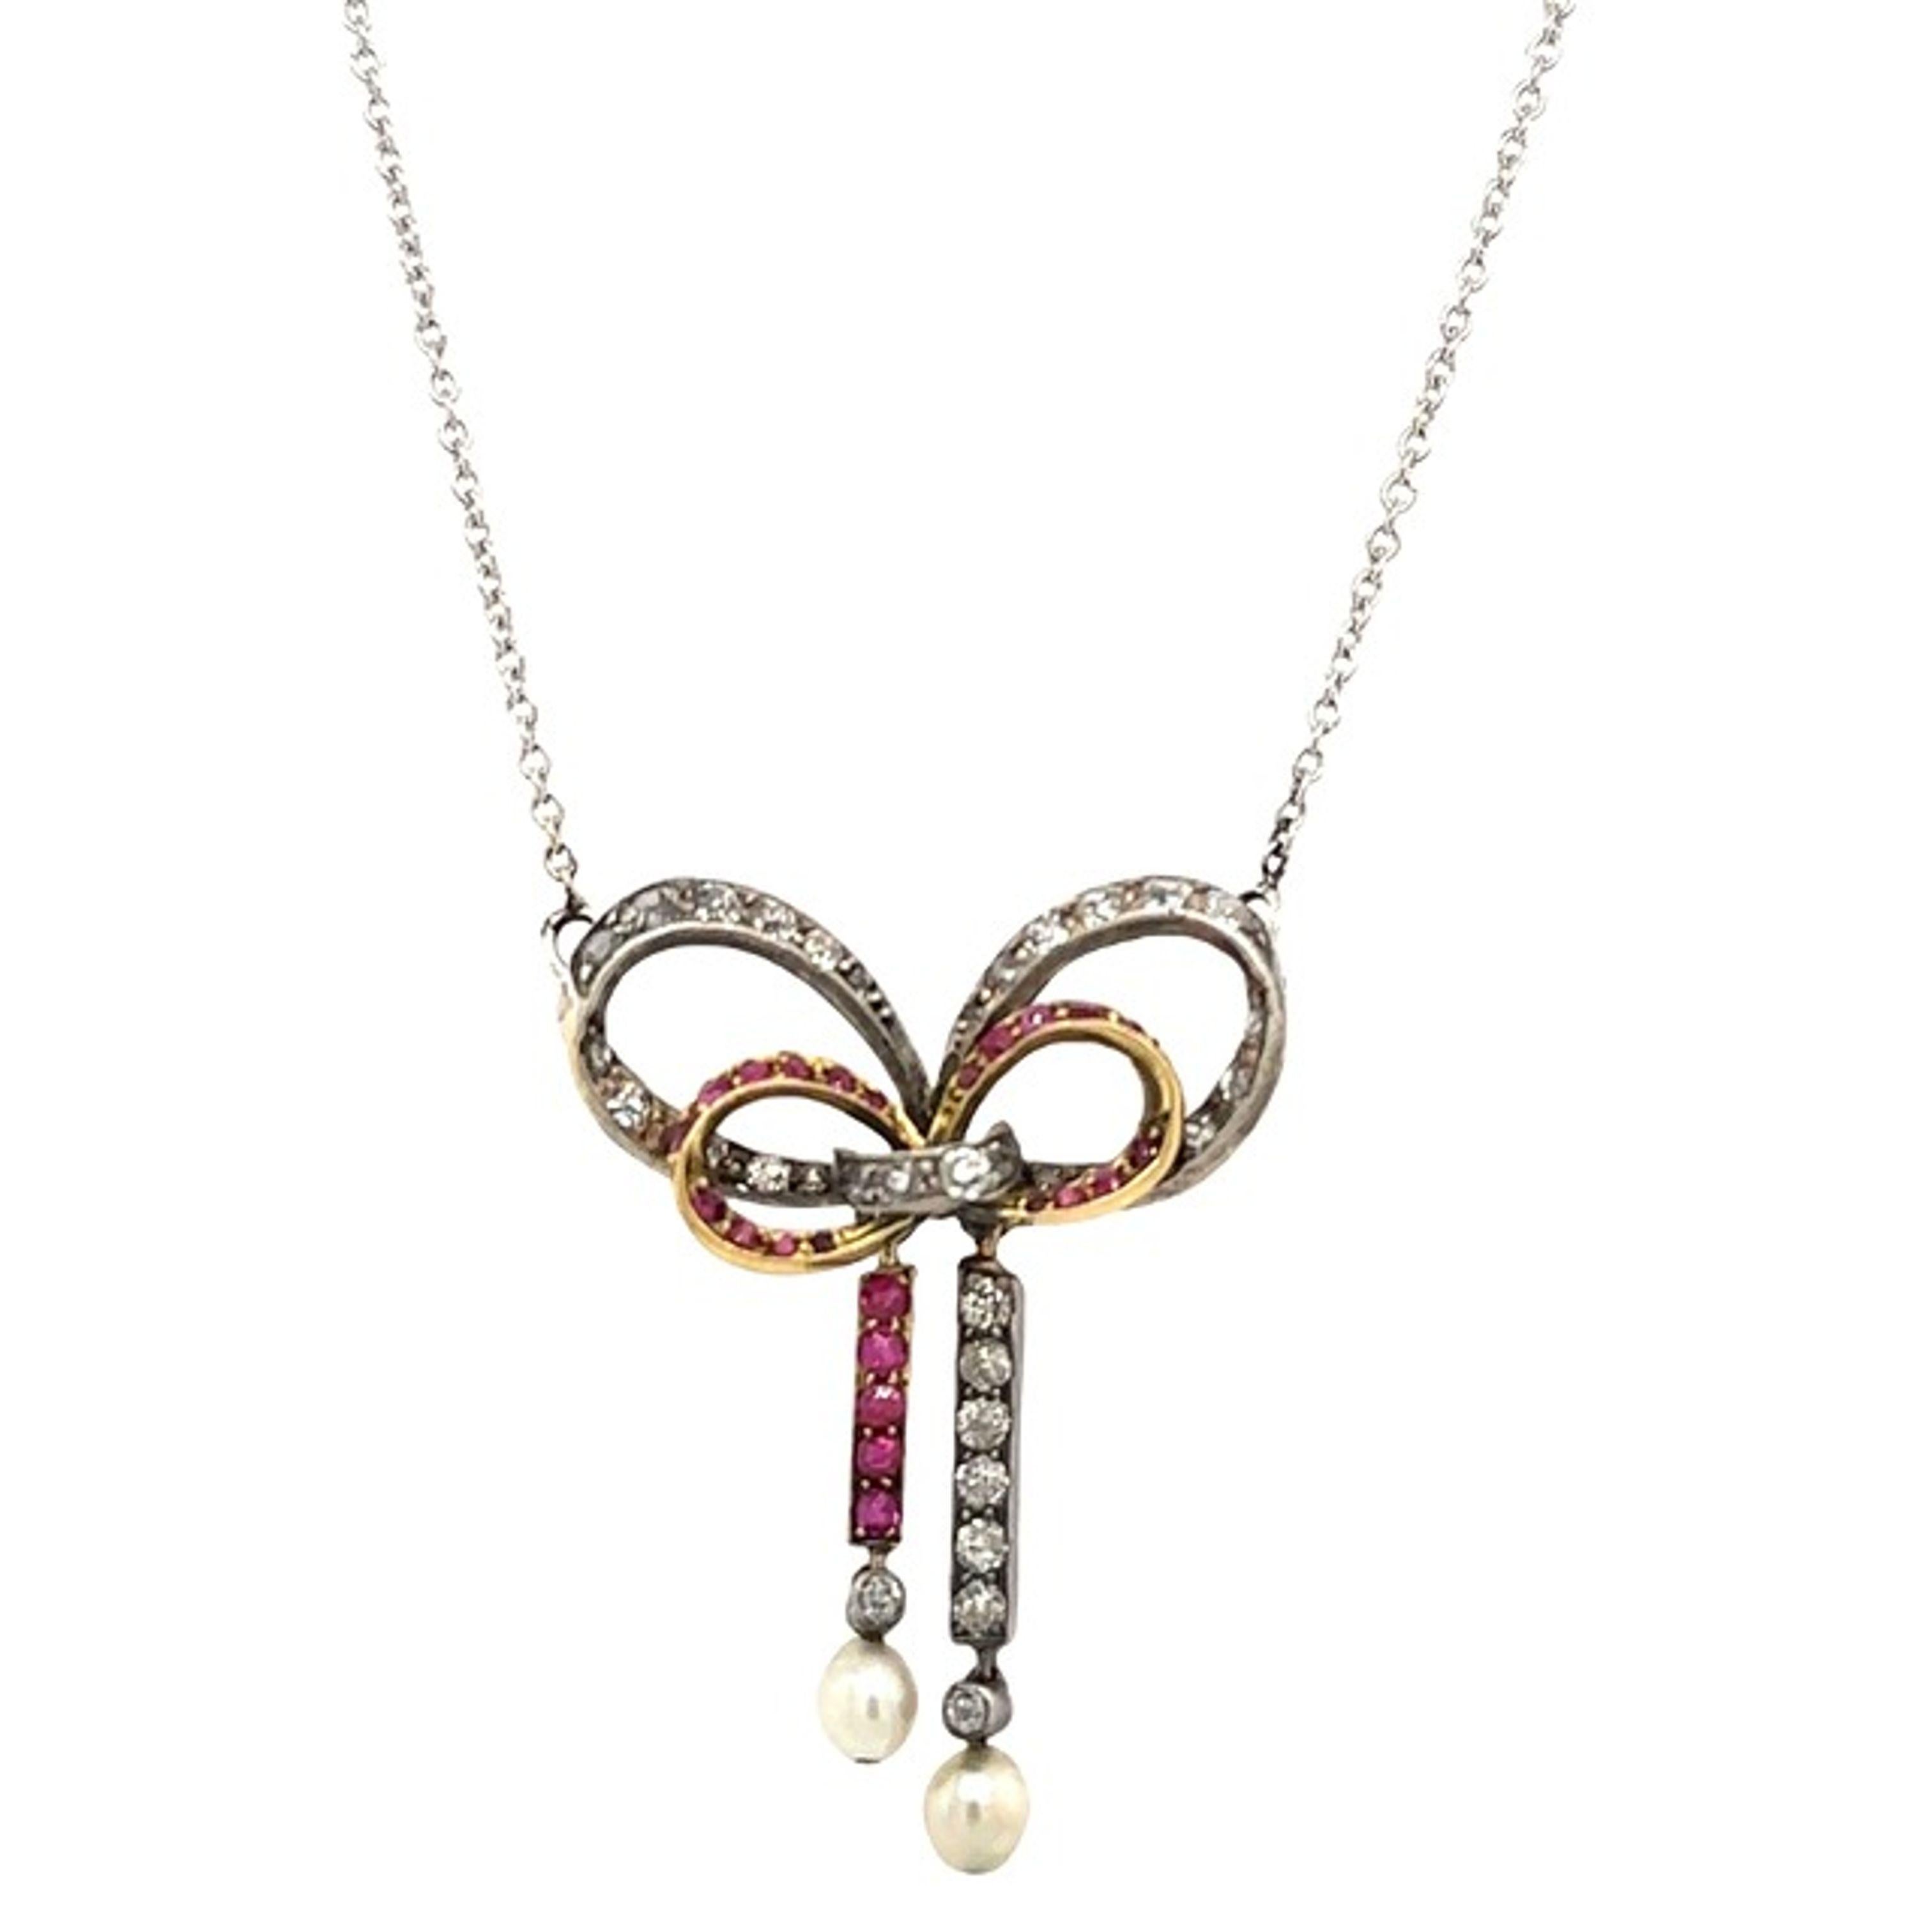 This gorgeous vintage Diamond, Ruby and Pearl pendant  is set with  0.50ct of rose cut Diamonds in 8ct yellow gold and silver on back of the pendant, The pendant is suspended from a 14ct white gold chain that measures 18